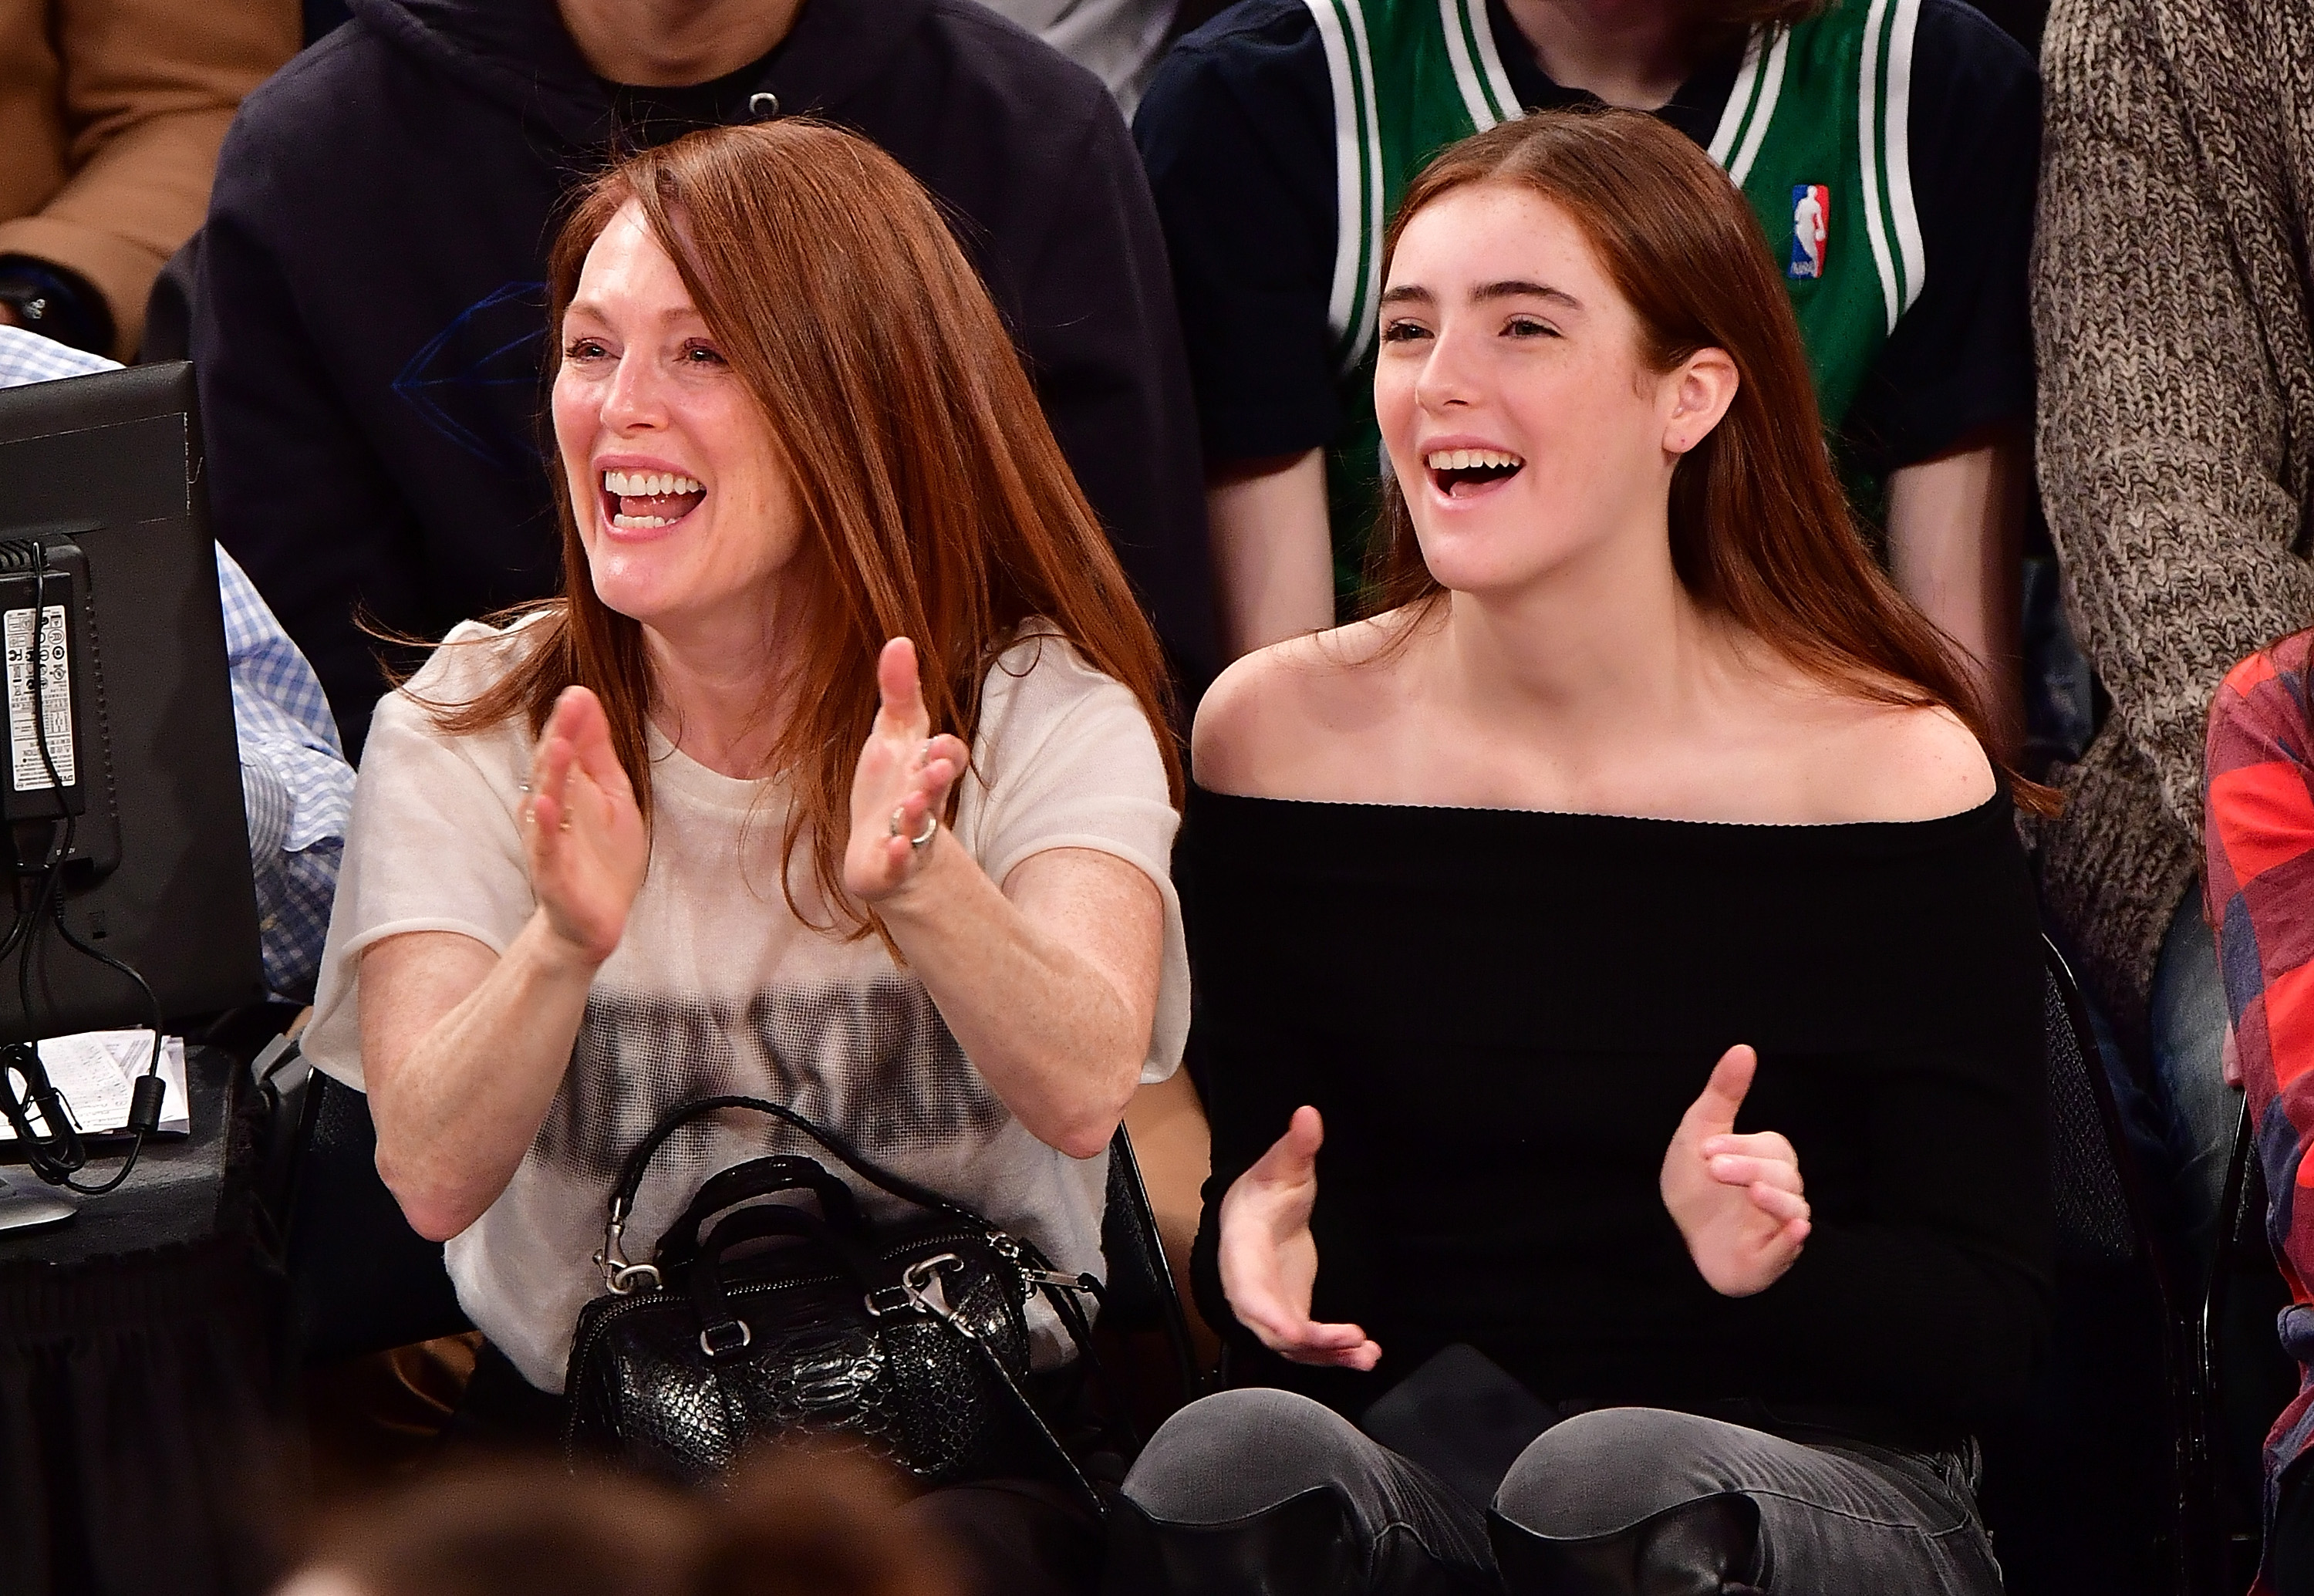 Julianne Moore and Liv Freundlich at the Boston Celtics Vs. New York Knicks game in New York City on December 25, 2016 | Source: Getty Images